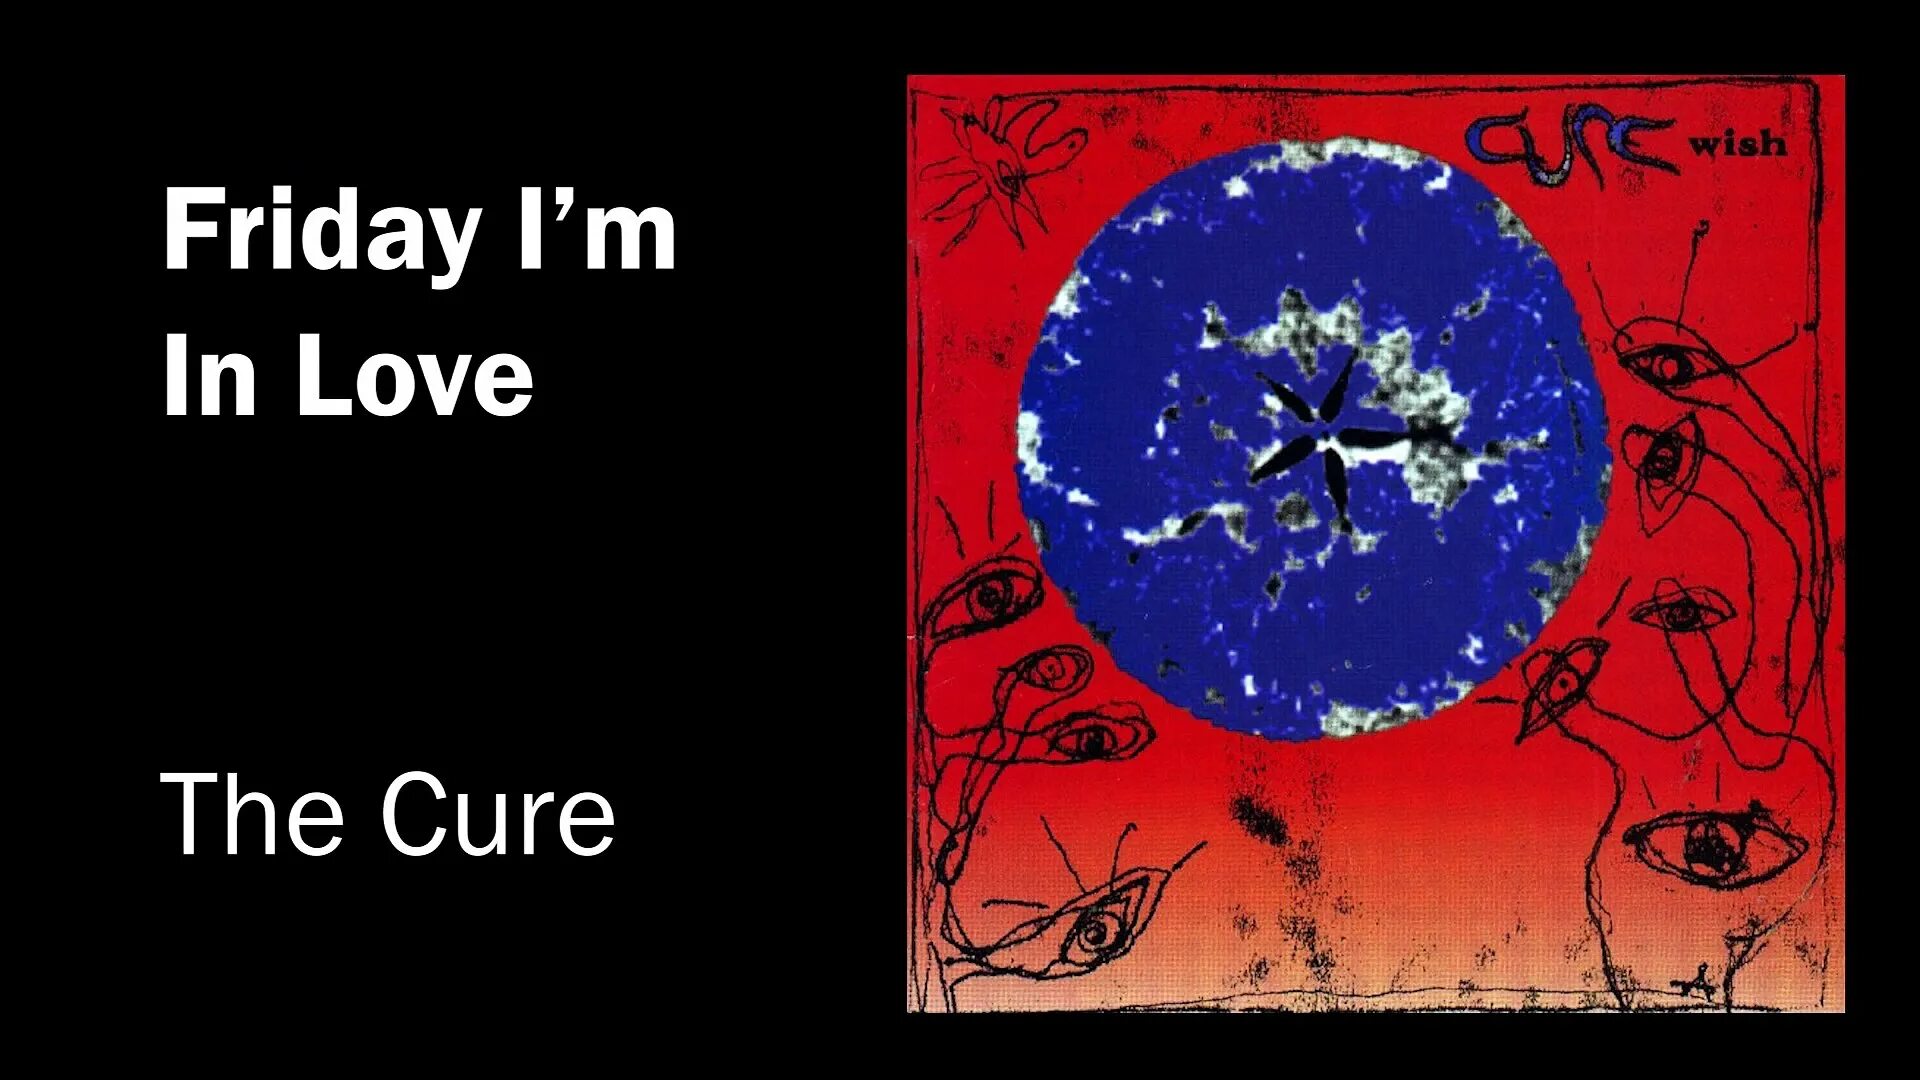 Friday i in love the cure. Cure Friday. The Cure Friday i'm in Love. Friday i m in Love the Cure.